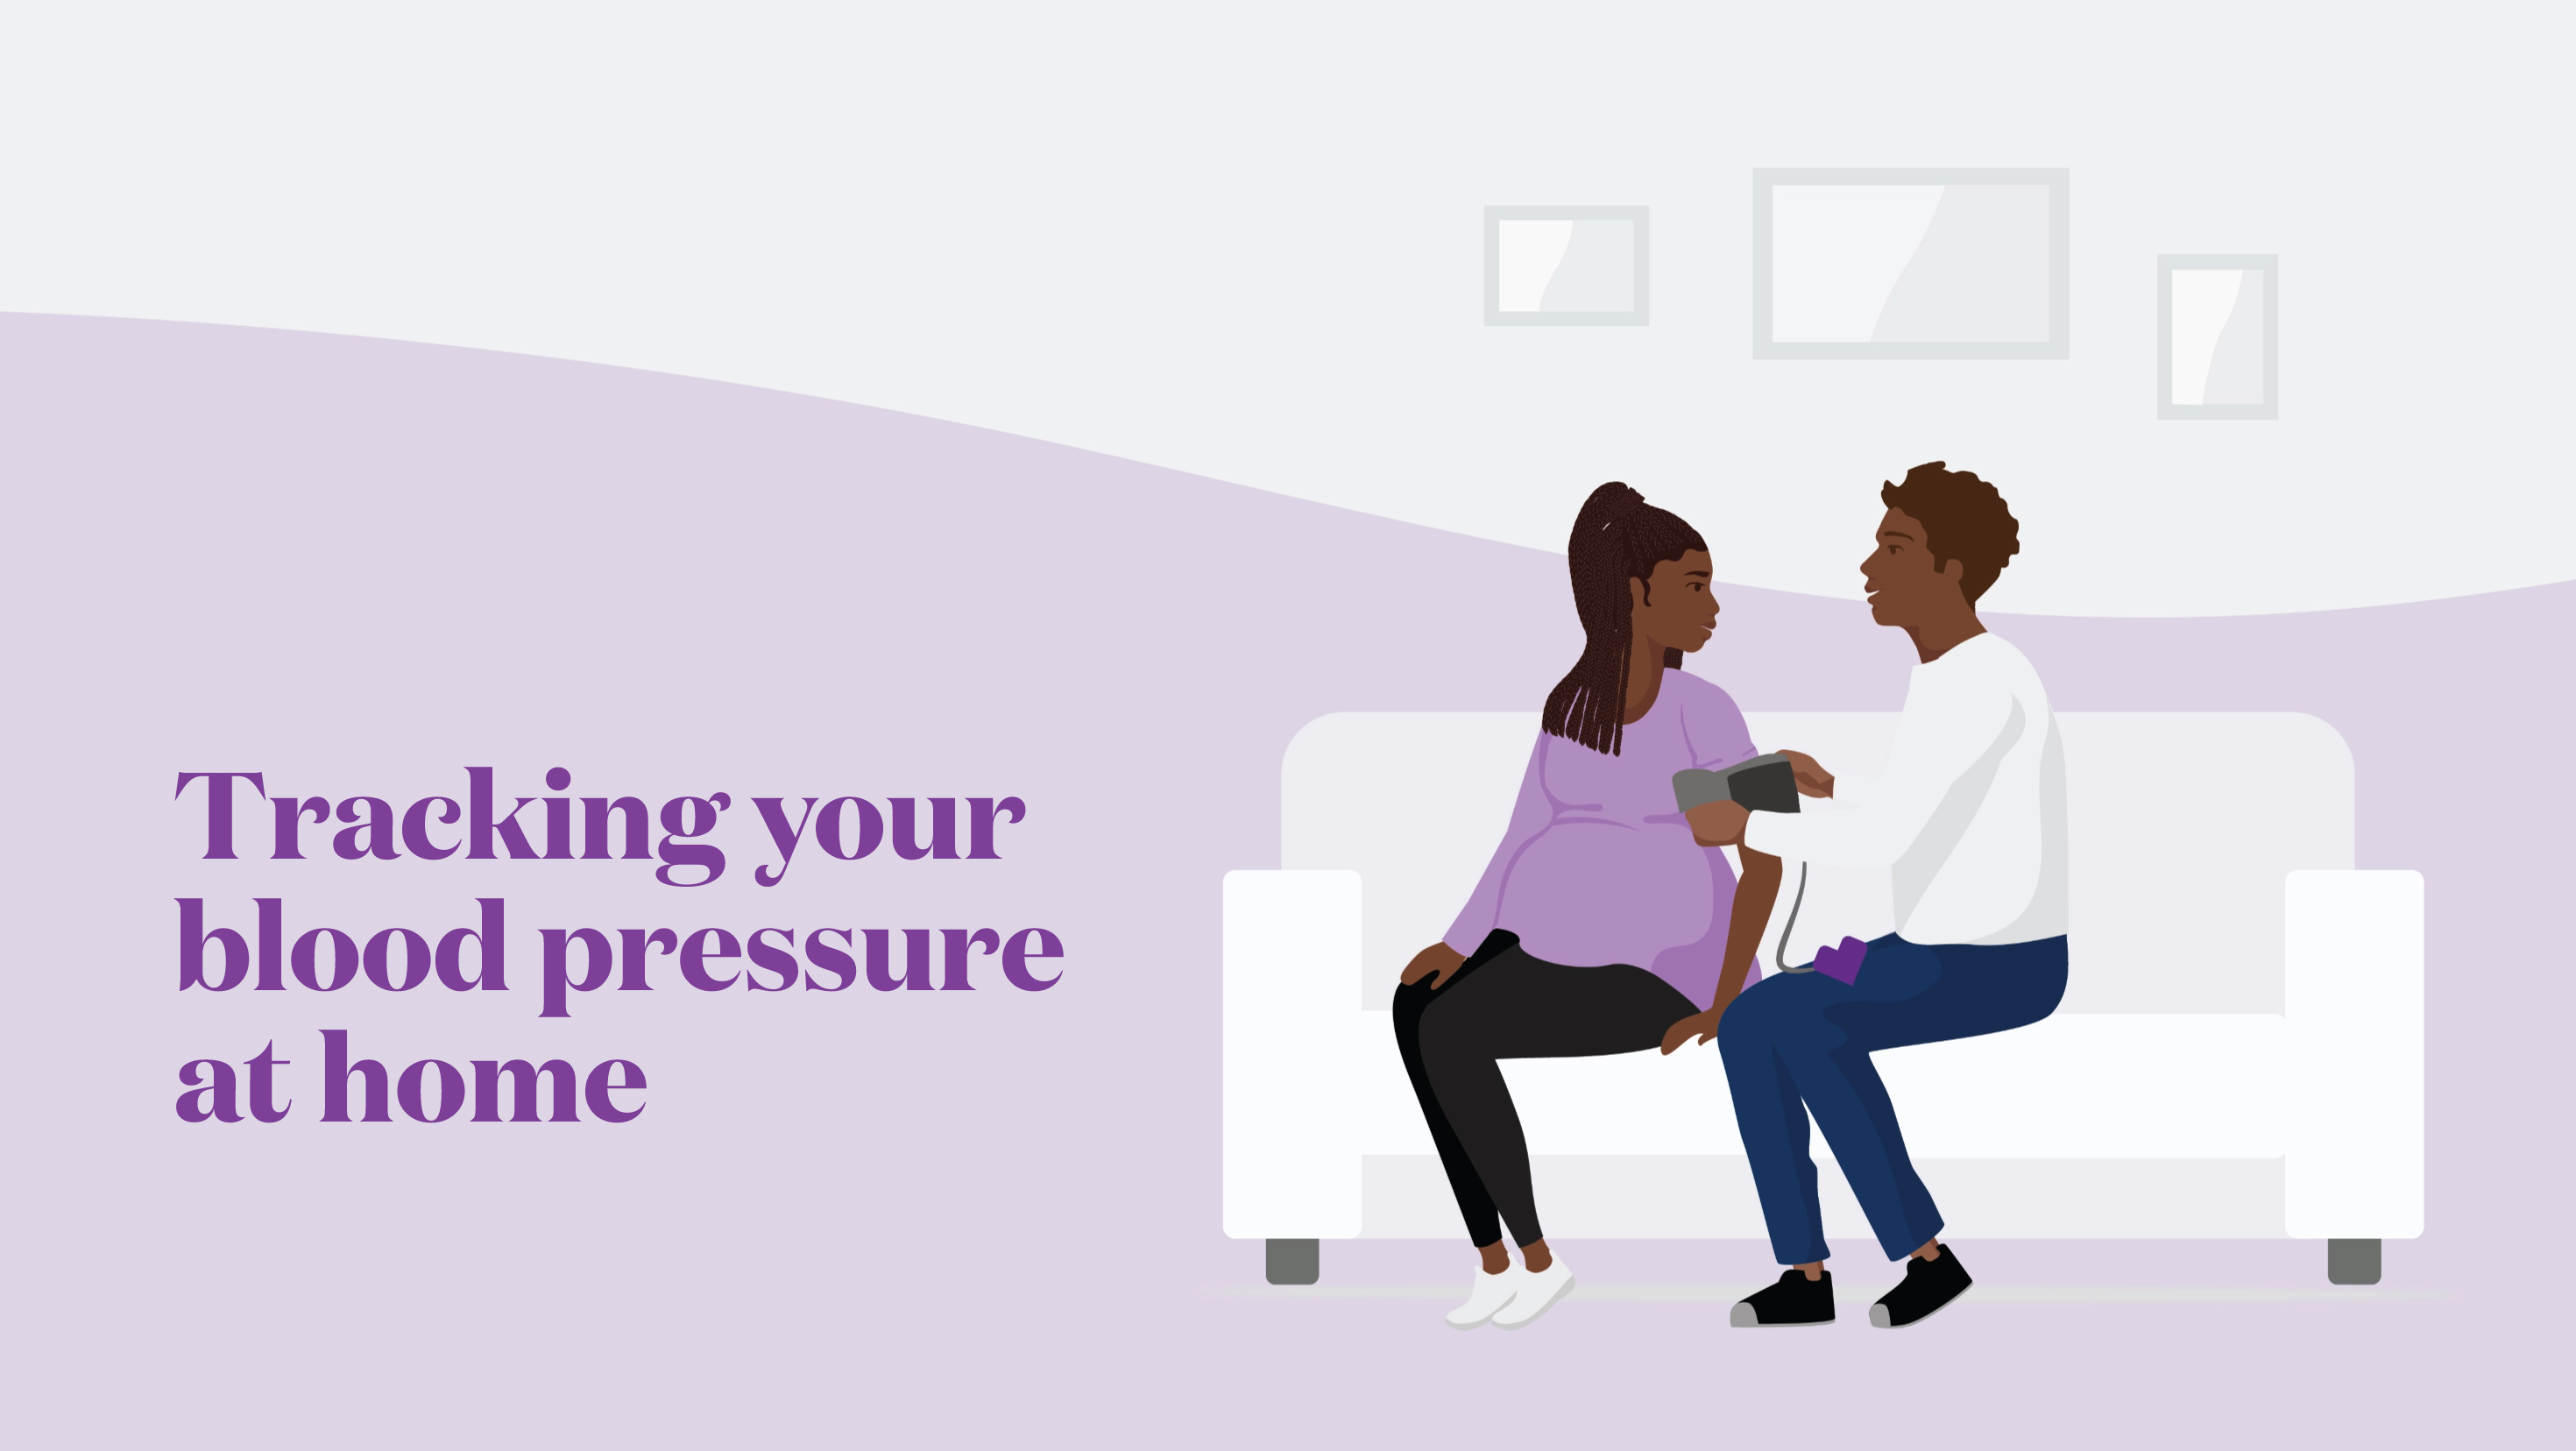 Tracking your blood pressure at home.